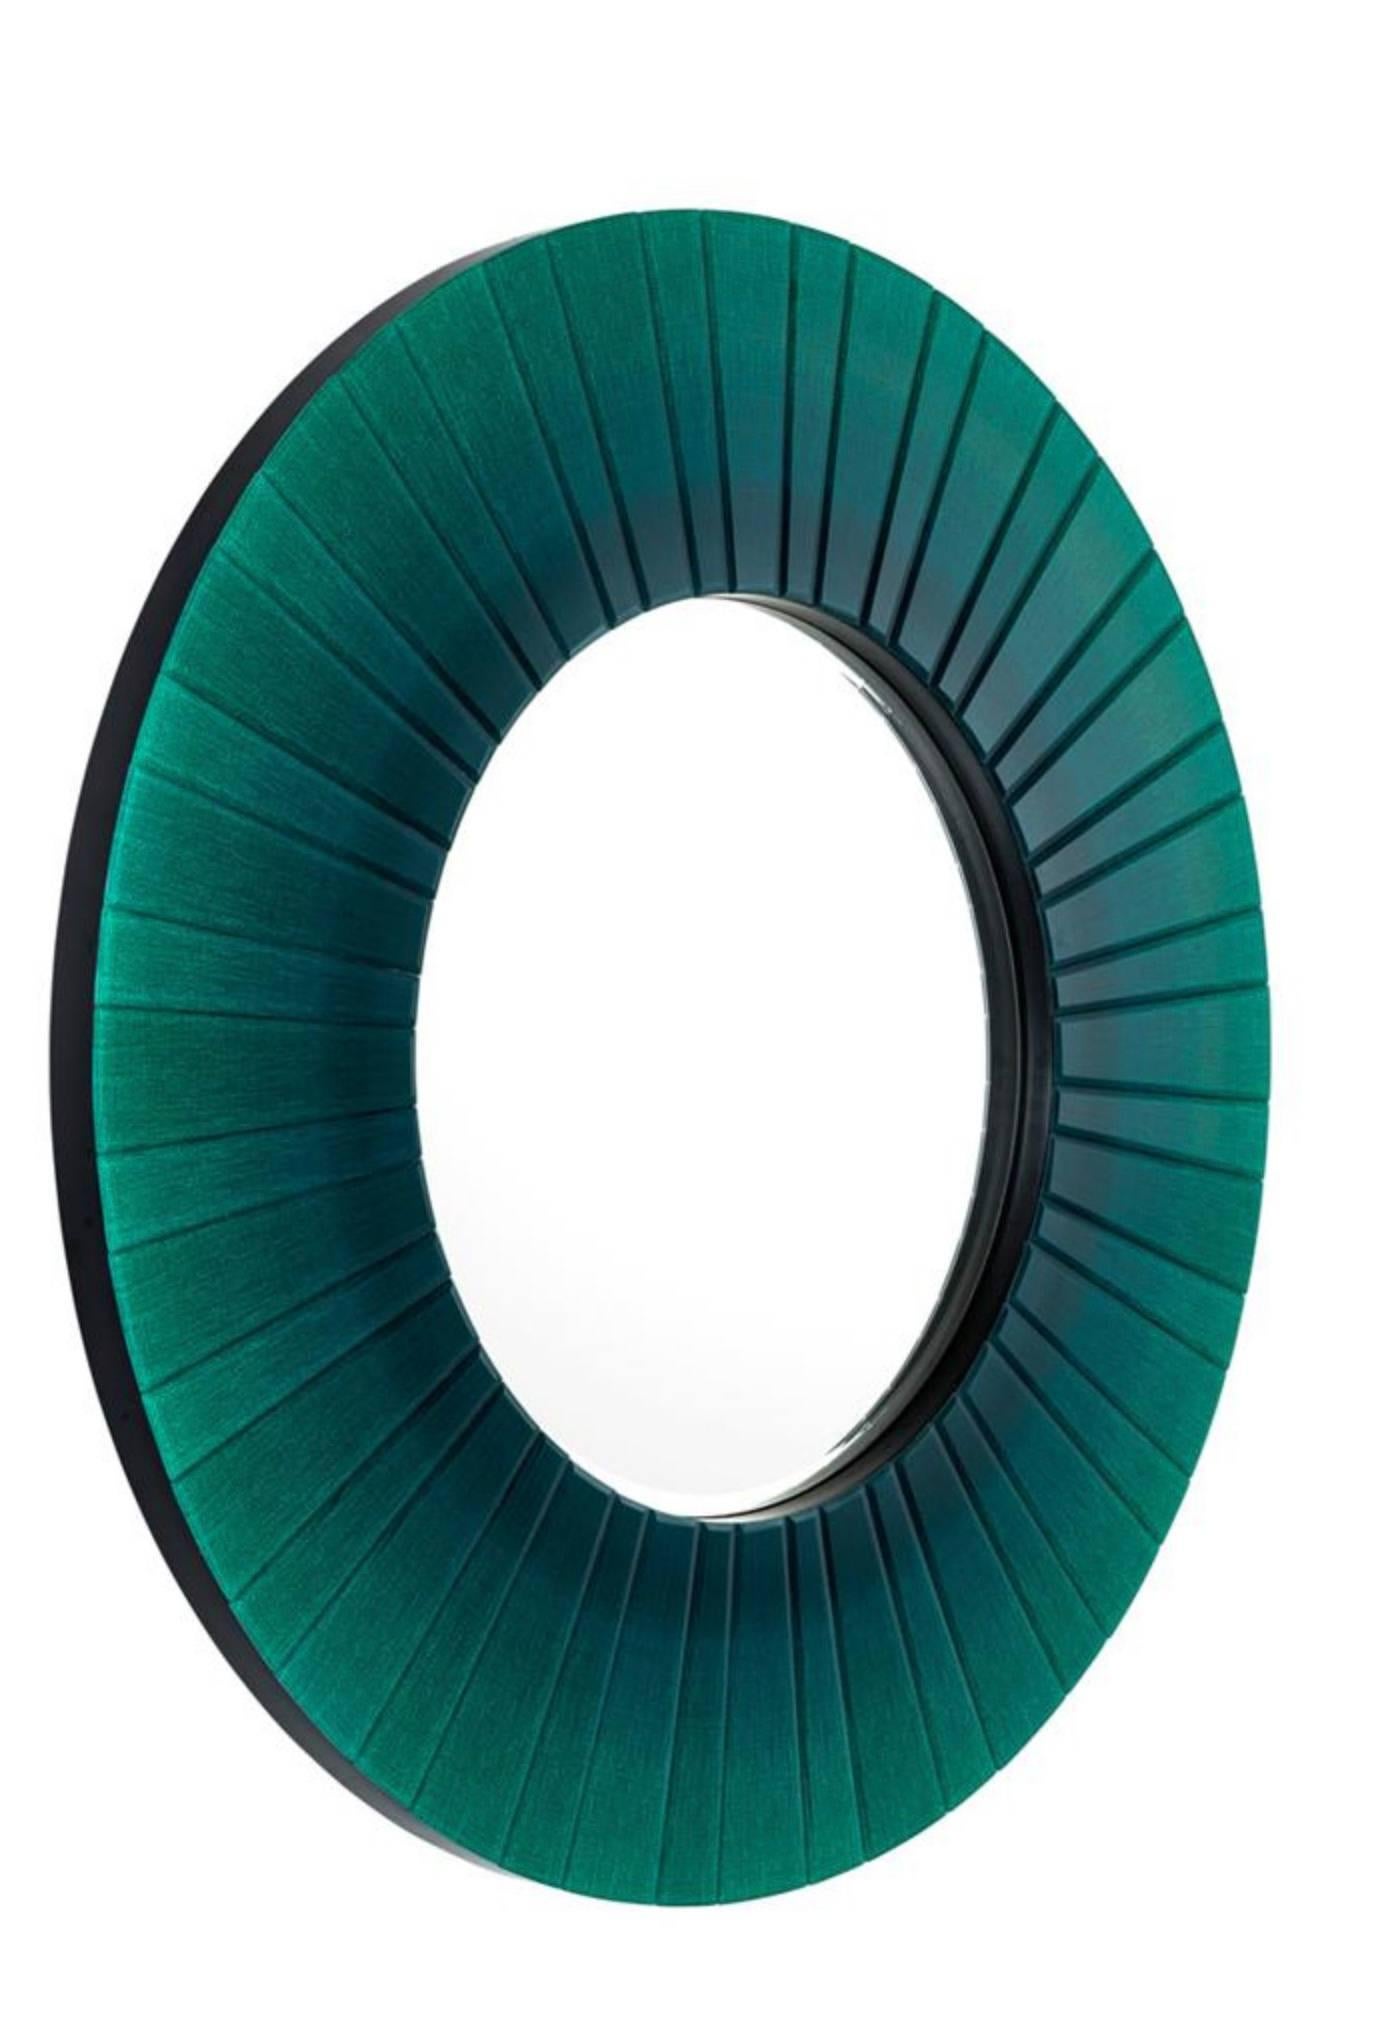 Large round beveled glass mirror. Colored glass features harmonious blue to green scheme.

There is 1 available now. Otherwise there is a 6-7 week lead time.
 
Measurements: 43